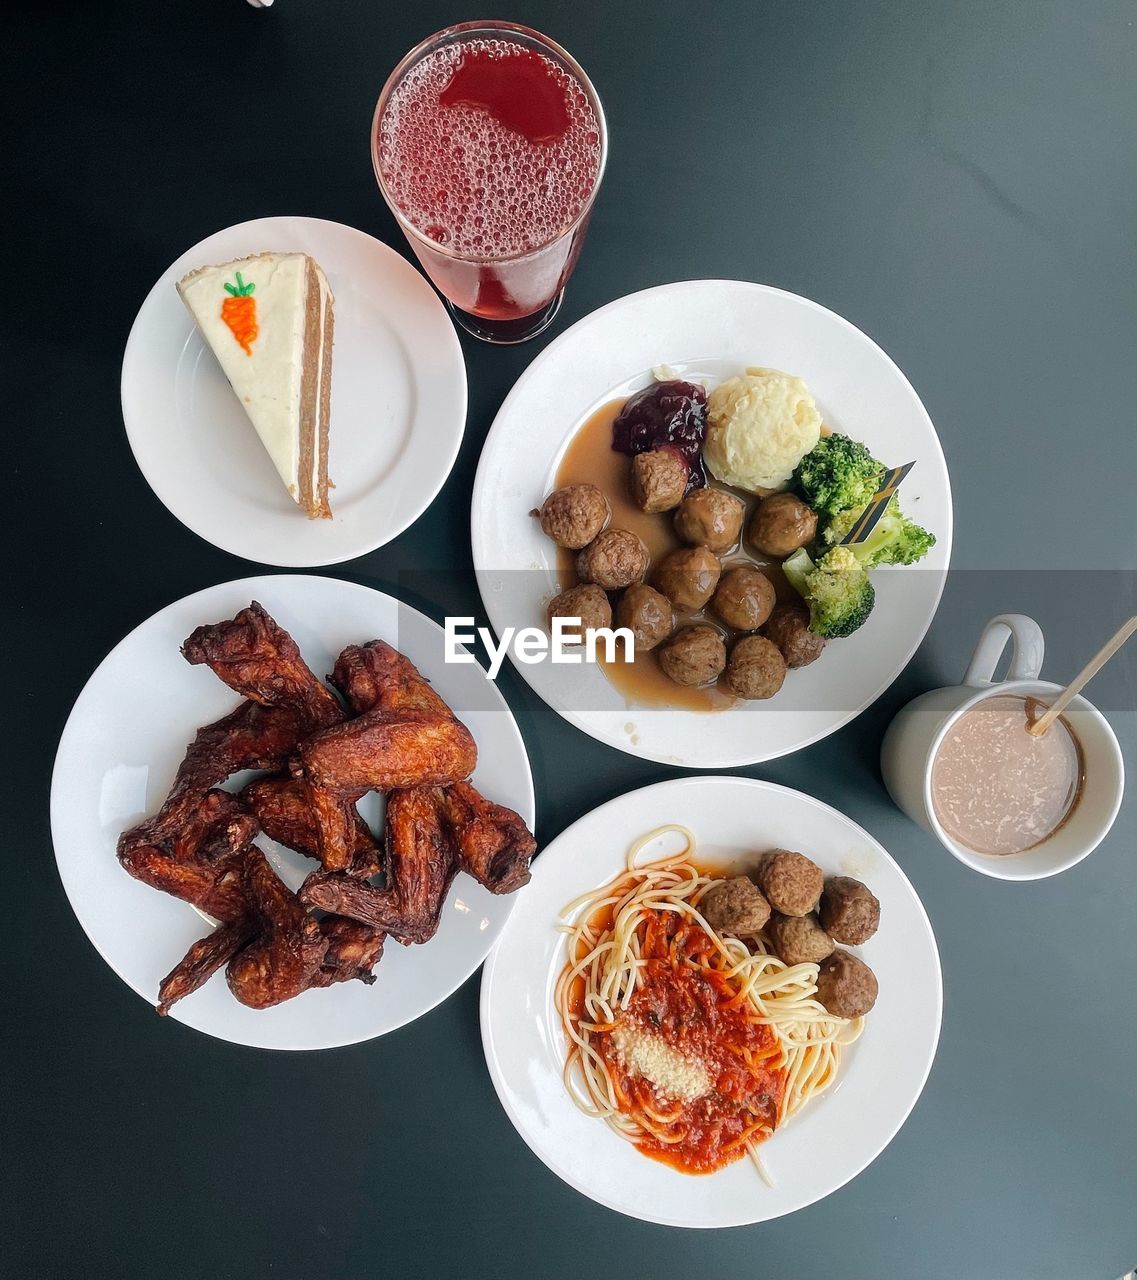 food and drink, food, dish, meal, healthy eating, freshness, plate, drink, table, breakfast, high angle view, no people, indoors, meat, fast food, cuisine, wellbeing, still life, studio shot, refreshment, fruit, produce, bowl, glass, lunch, directly above